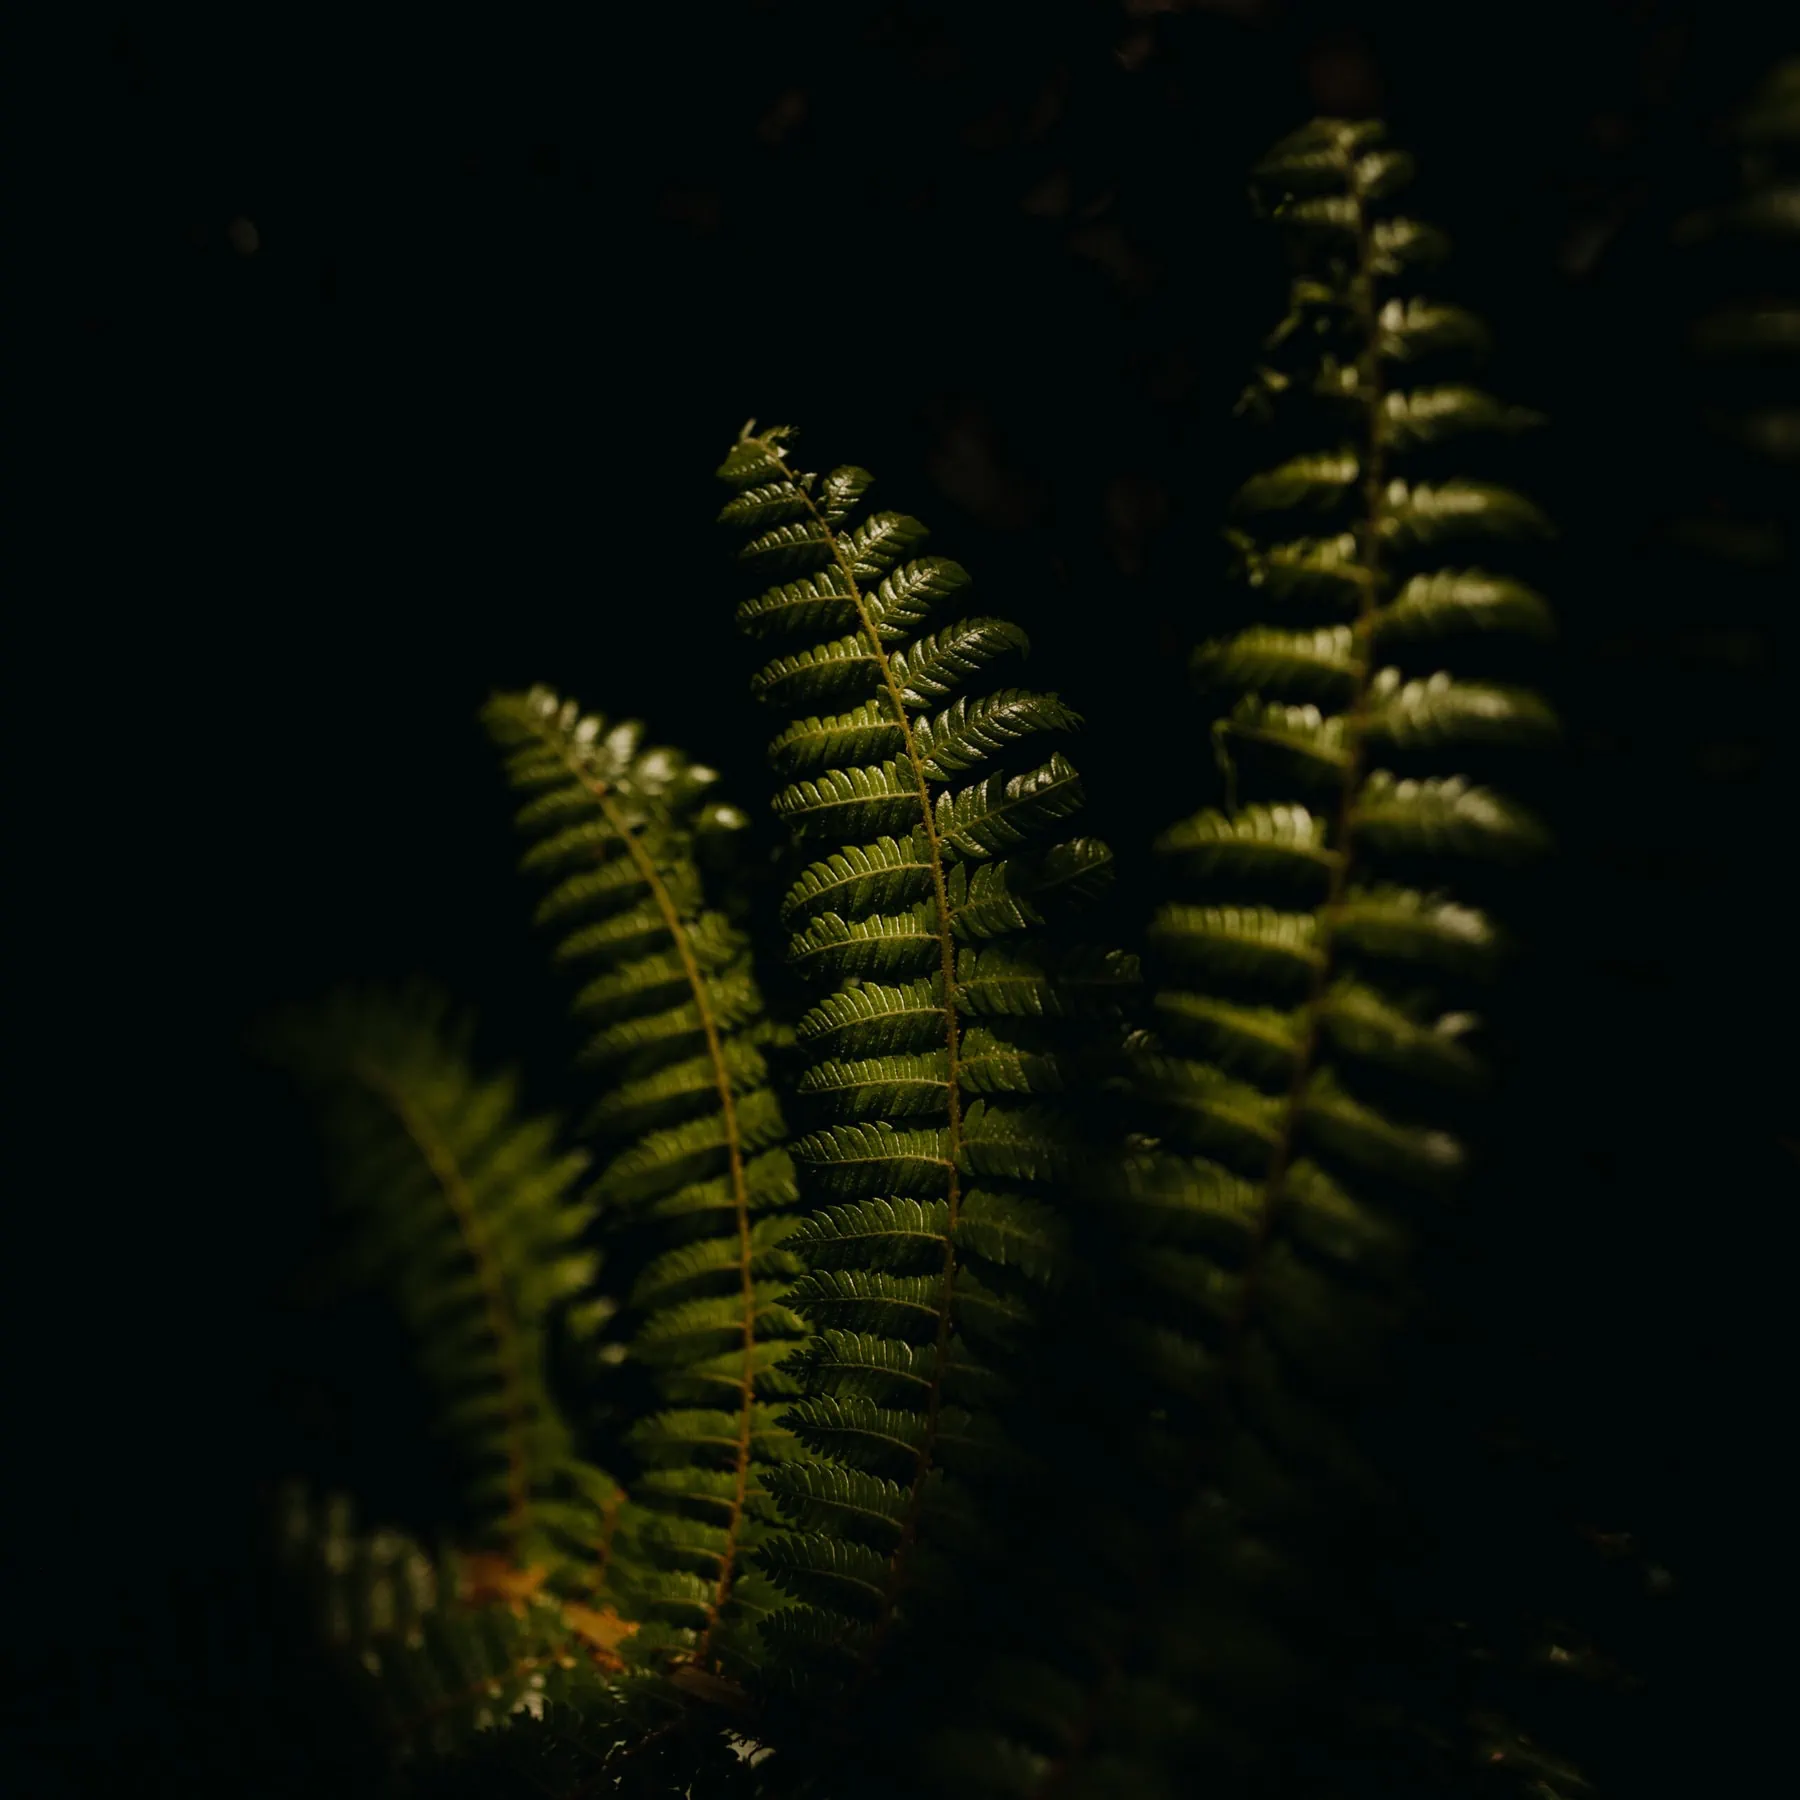 A photo of the ferns in the direct light within the forest.